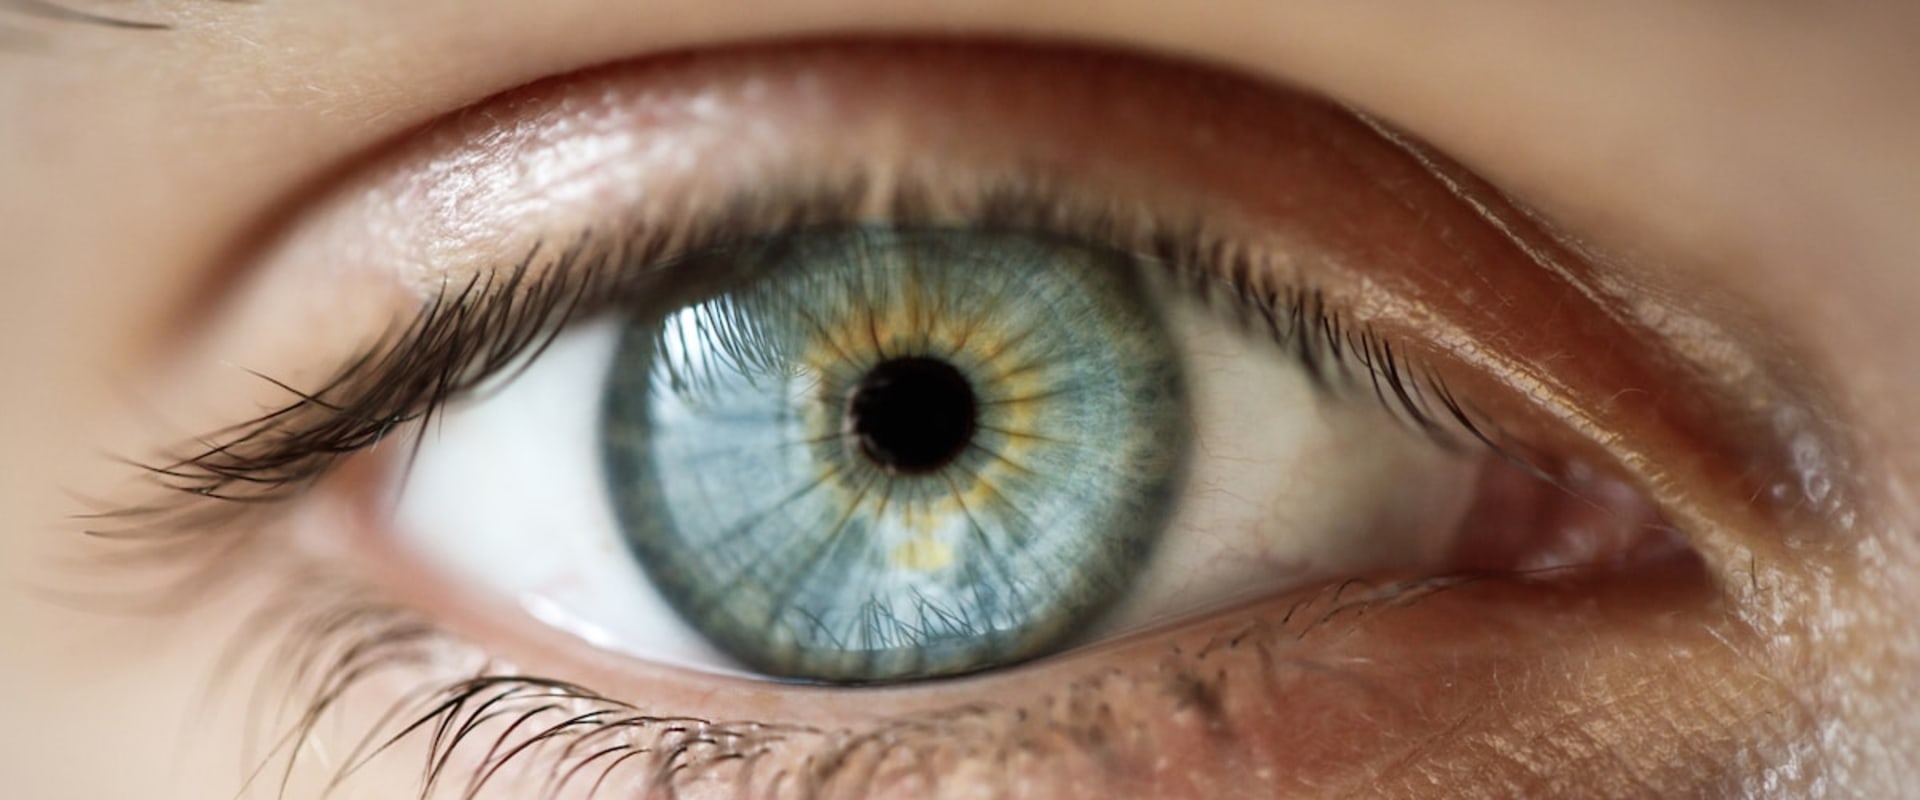 Can You Get LASIK Surgery if You Have Astigmatism?